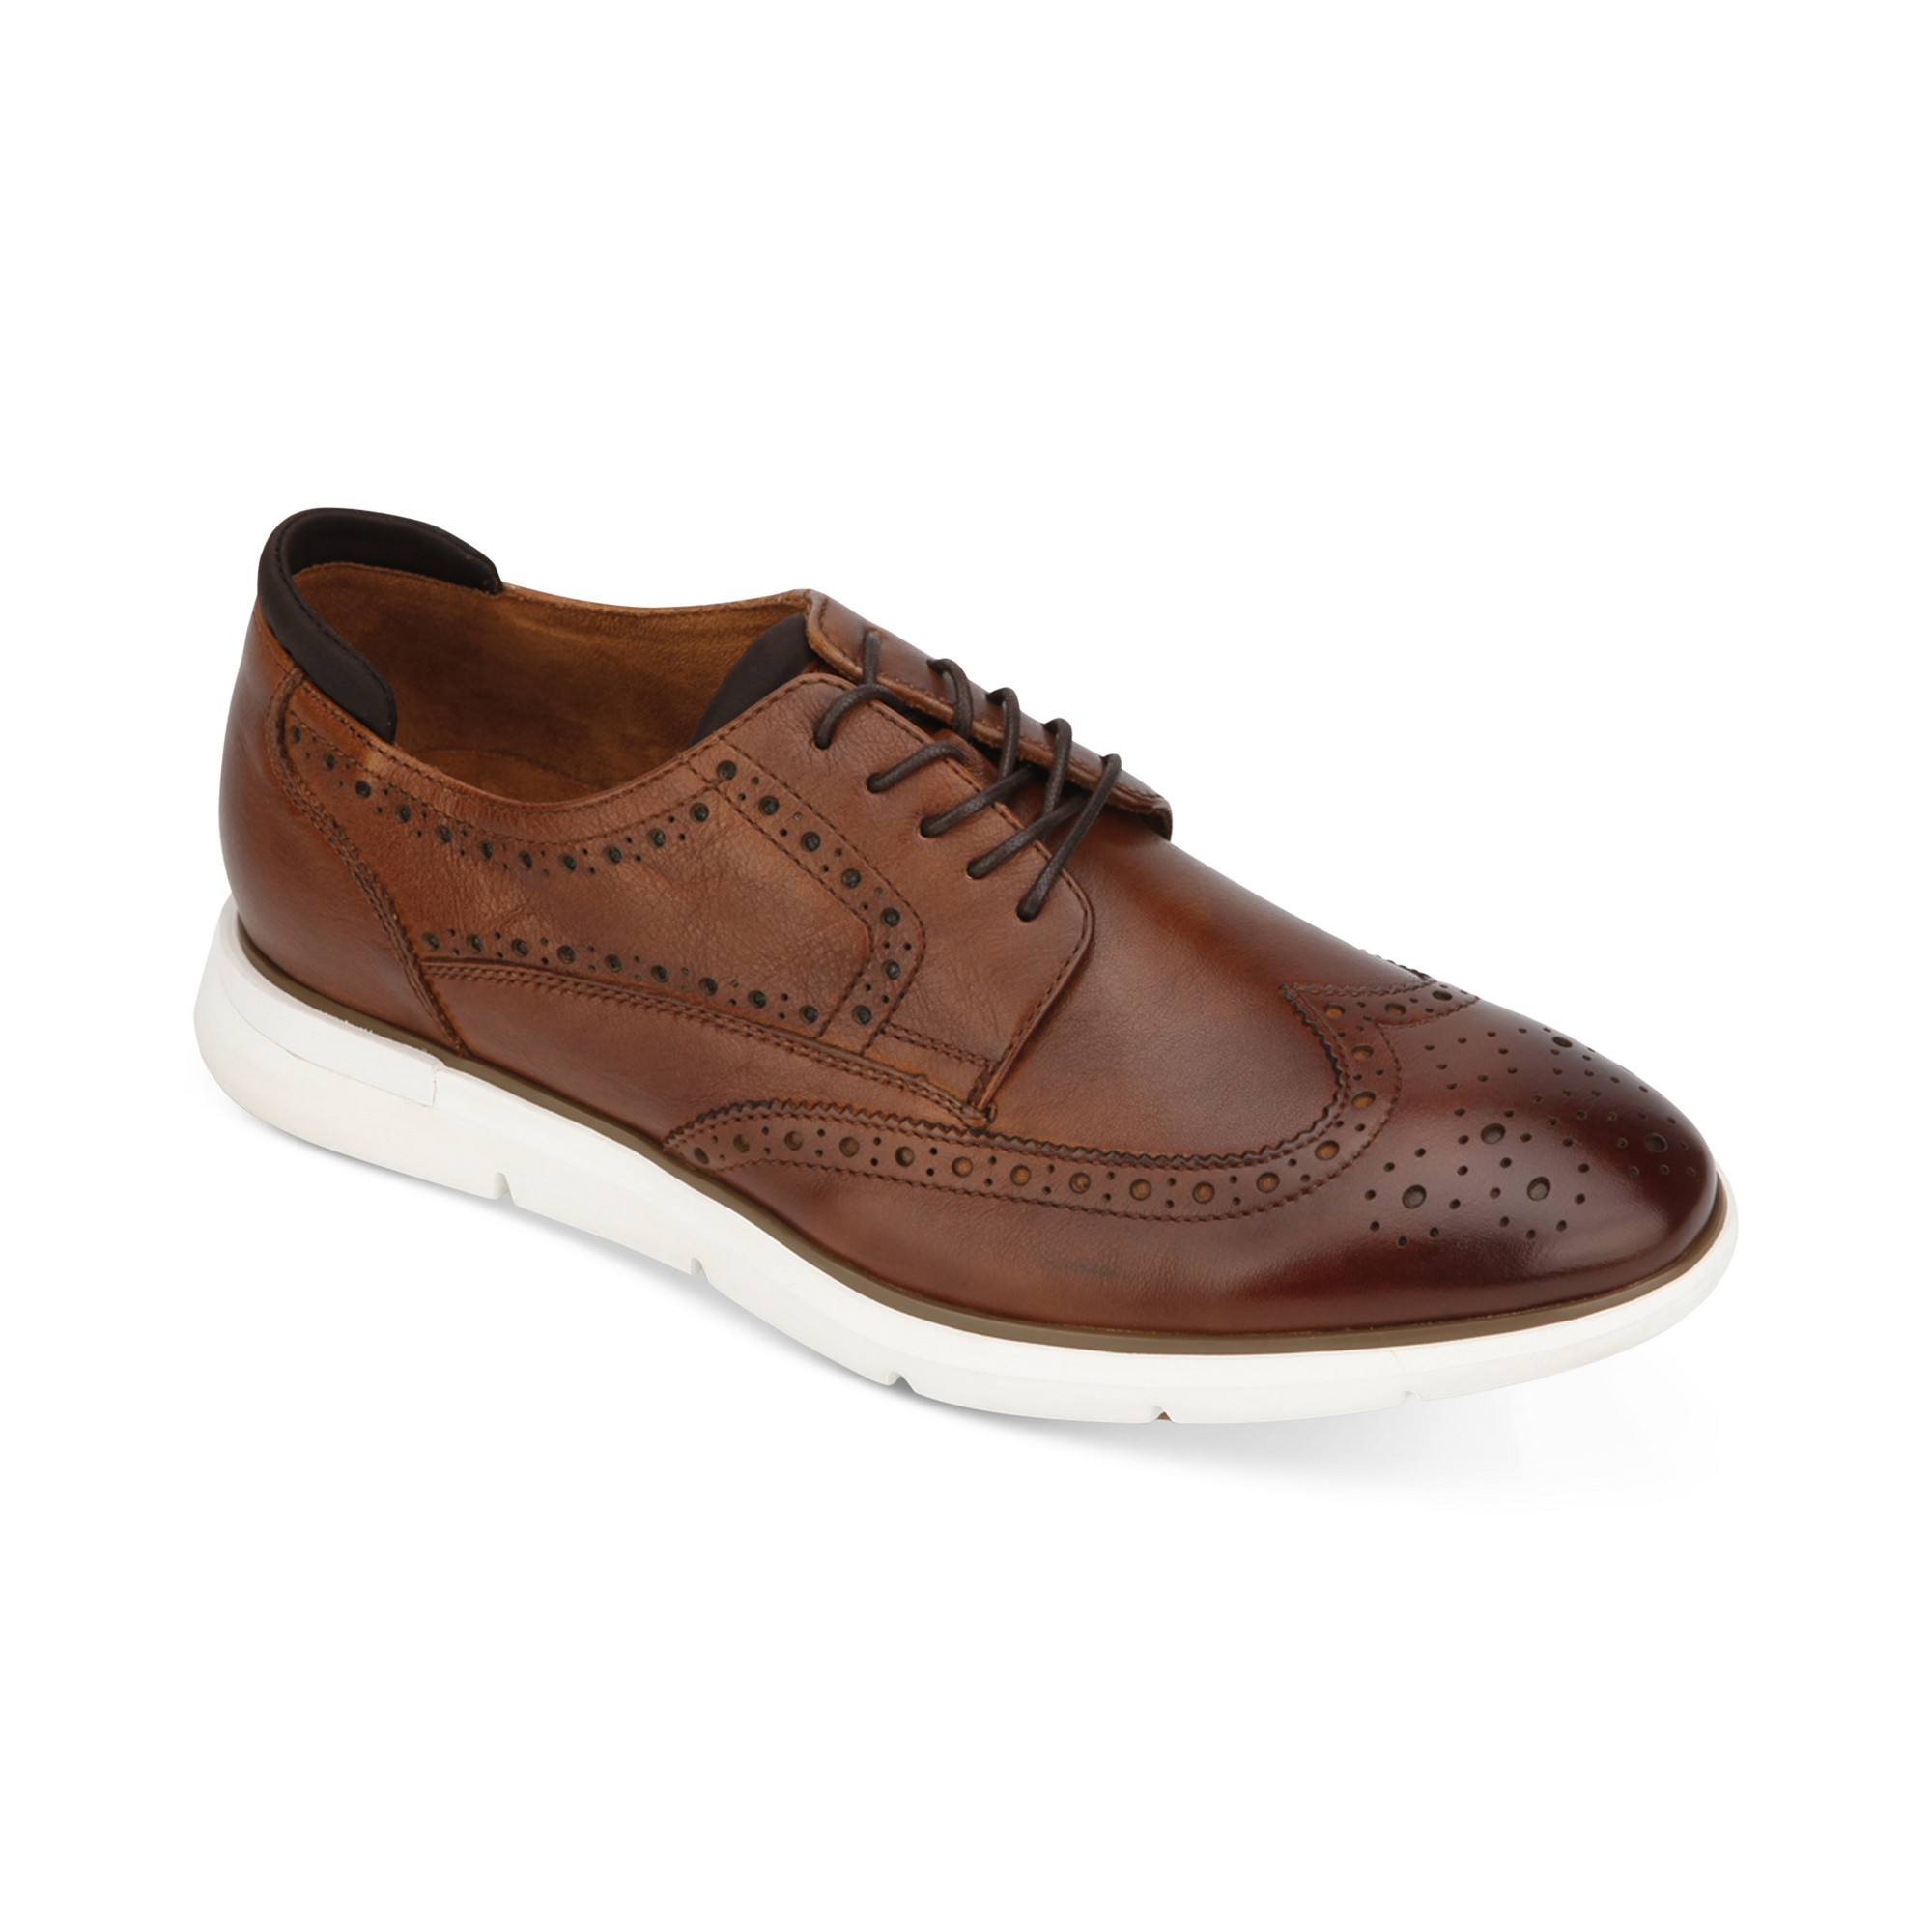 woocommerce-673321-2209615.cloudwaysapps.com-kenneth-cole-new-york-mens-brown-leather-dover-wingtip-oxfords-shoes